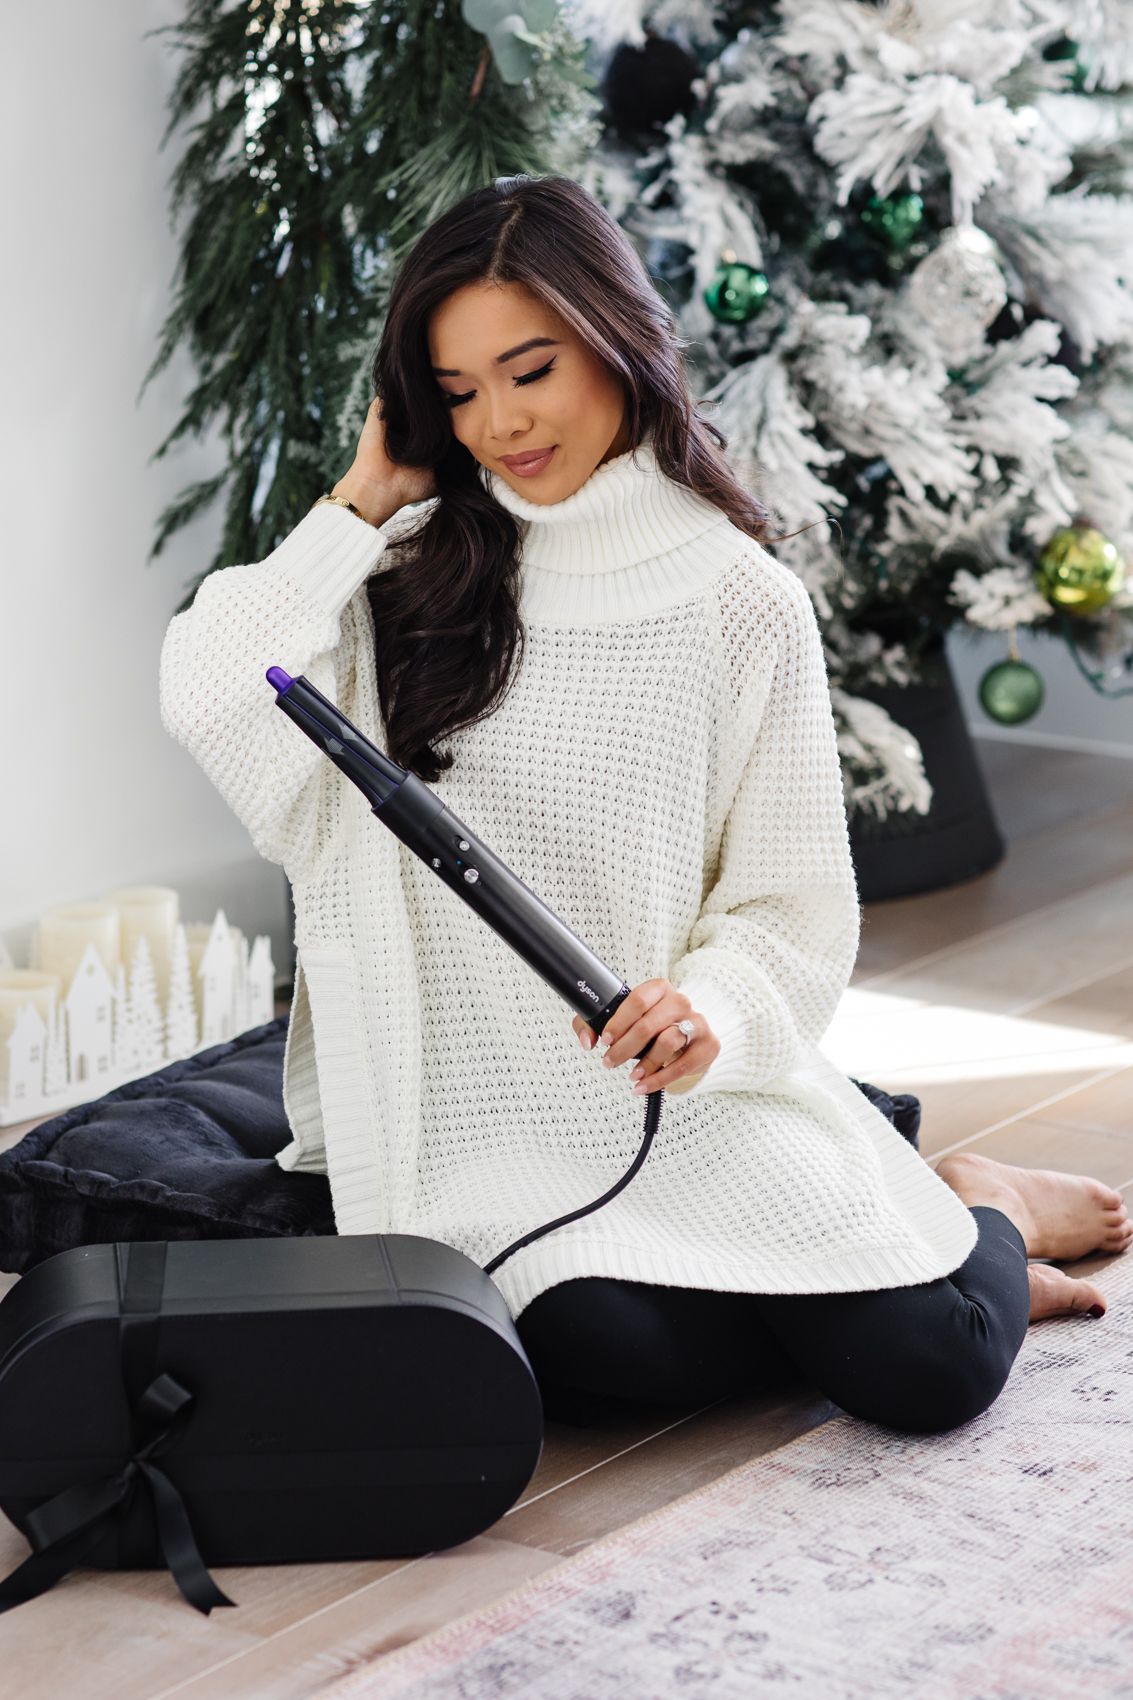 Blogger Hoang-Kim Cung's Dyson Airwrap review